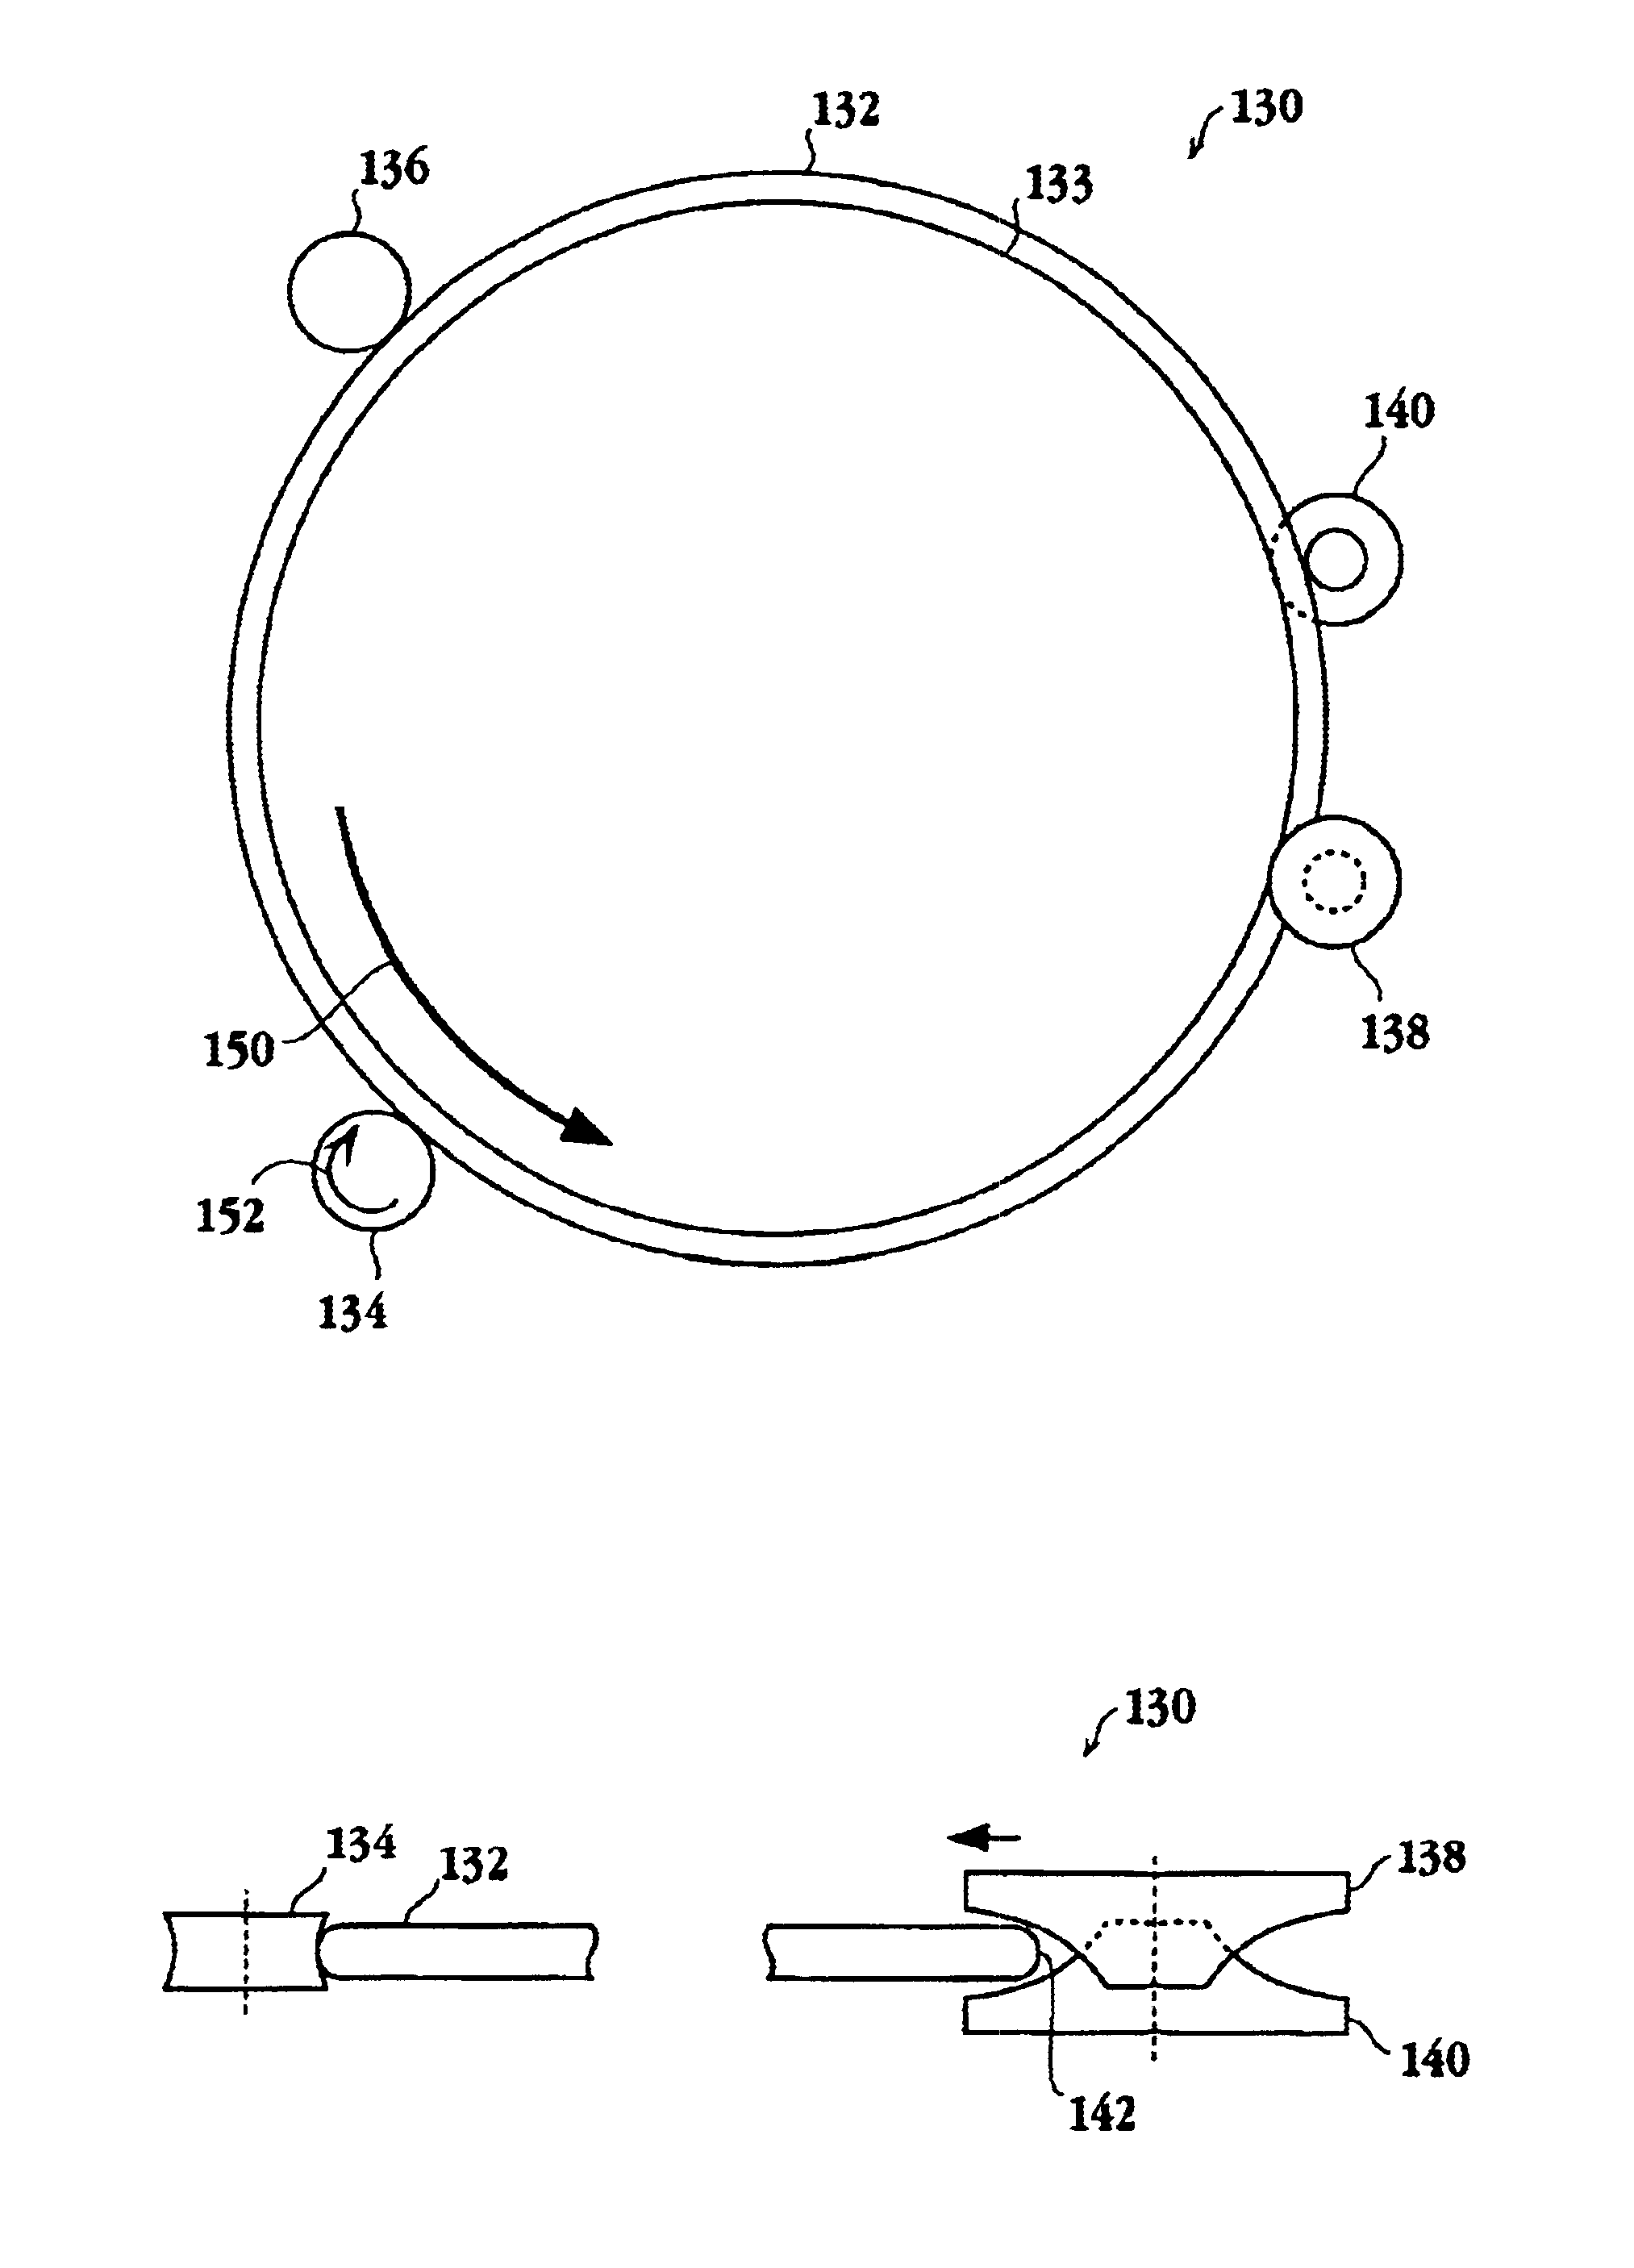 Wafer bevel edge cleaning system and apparatus